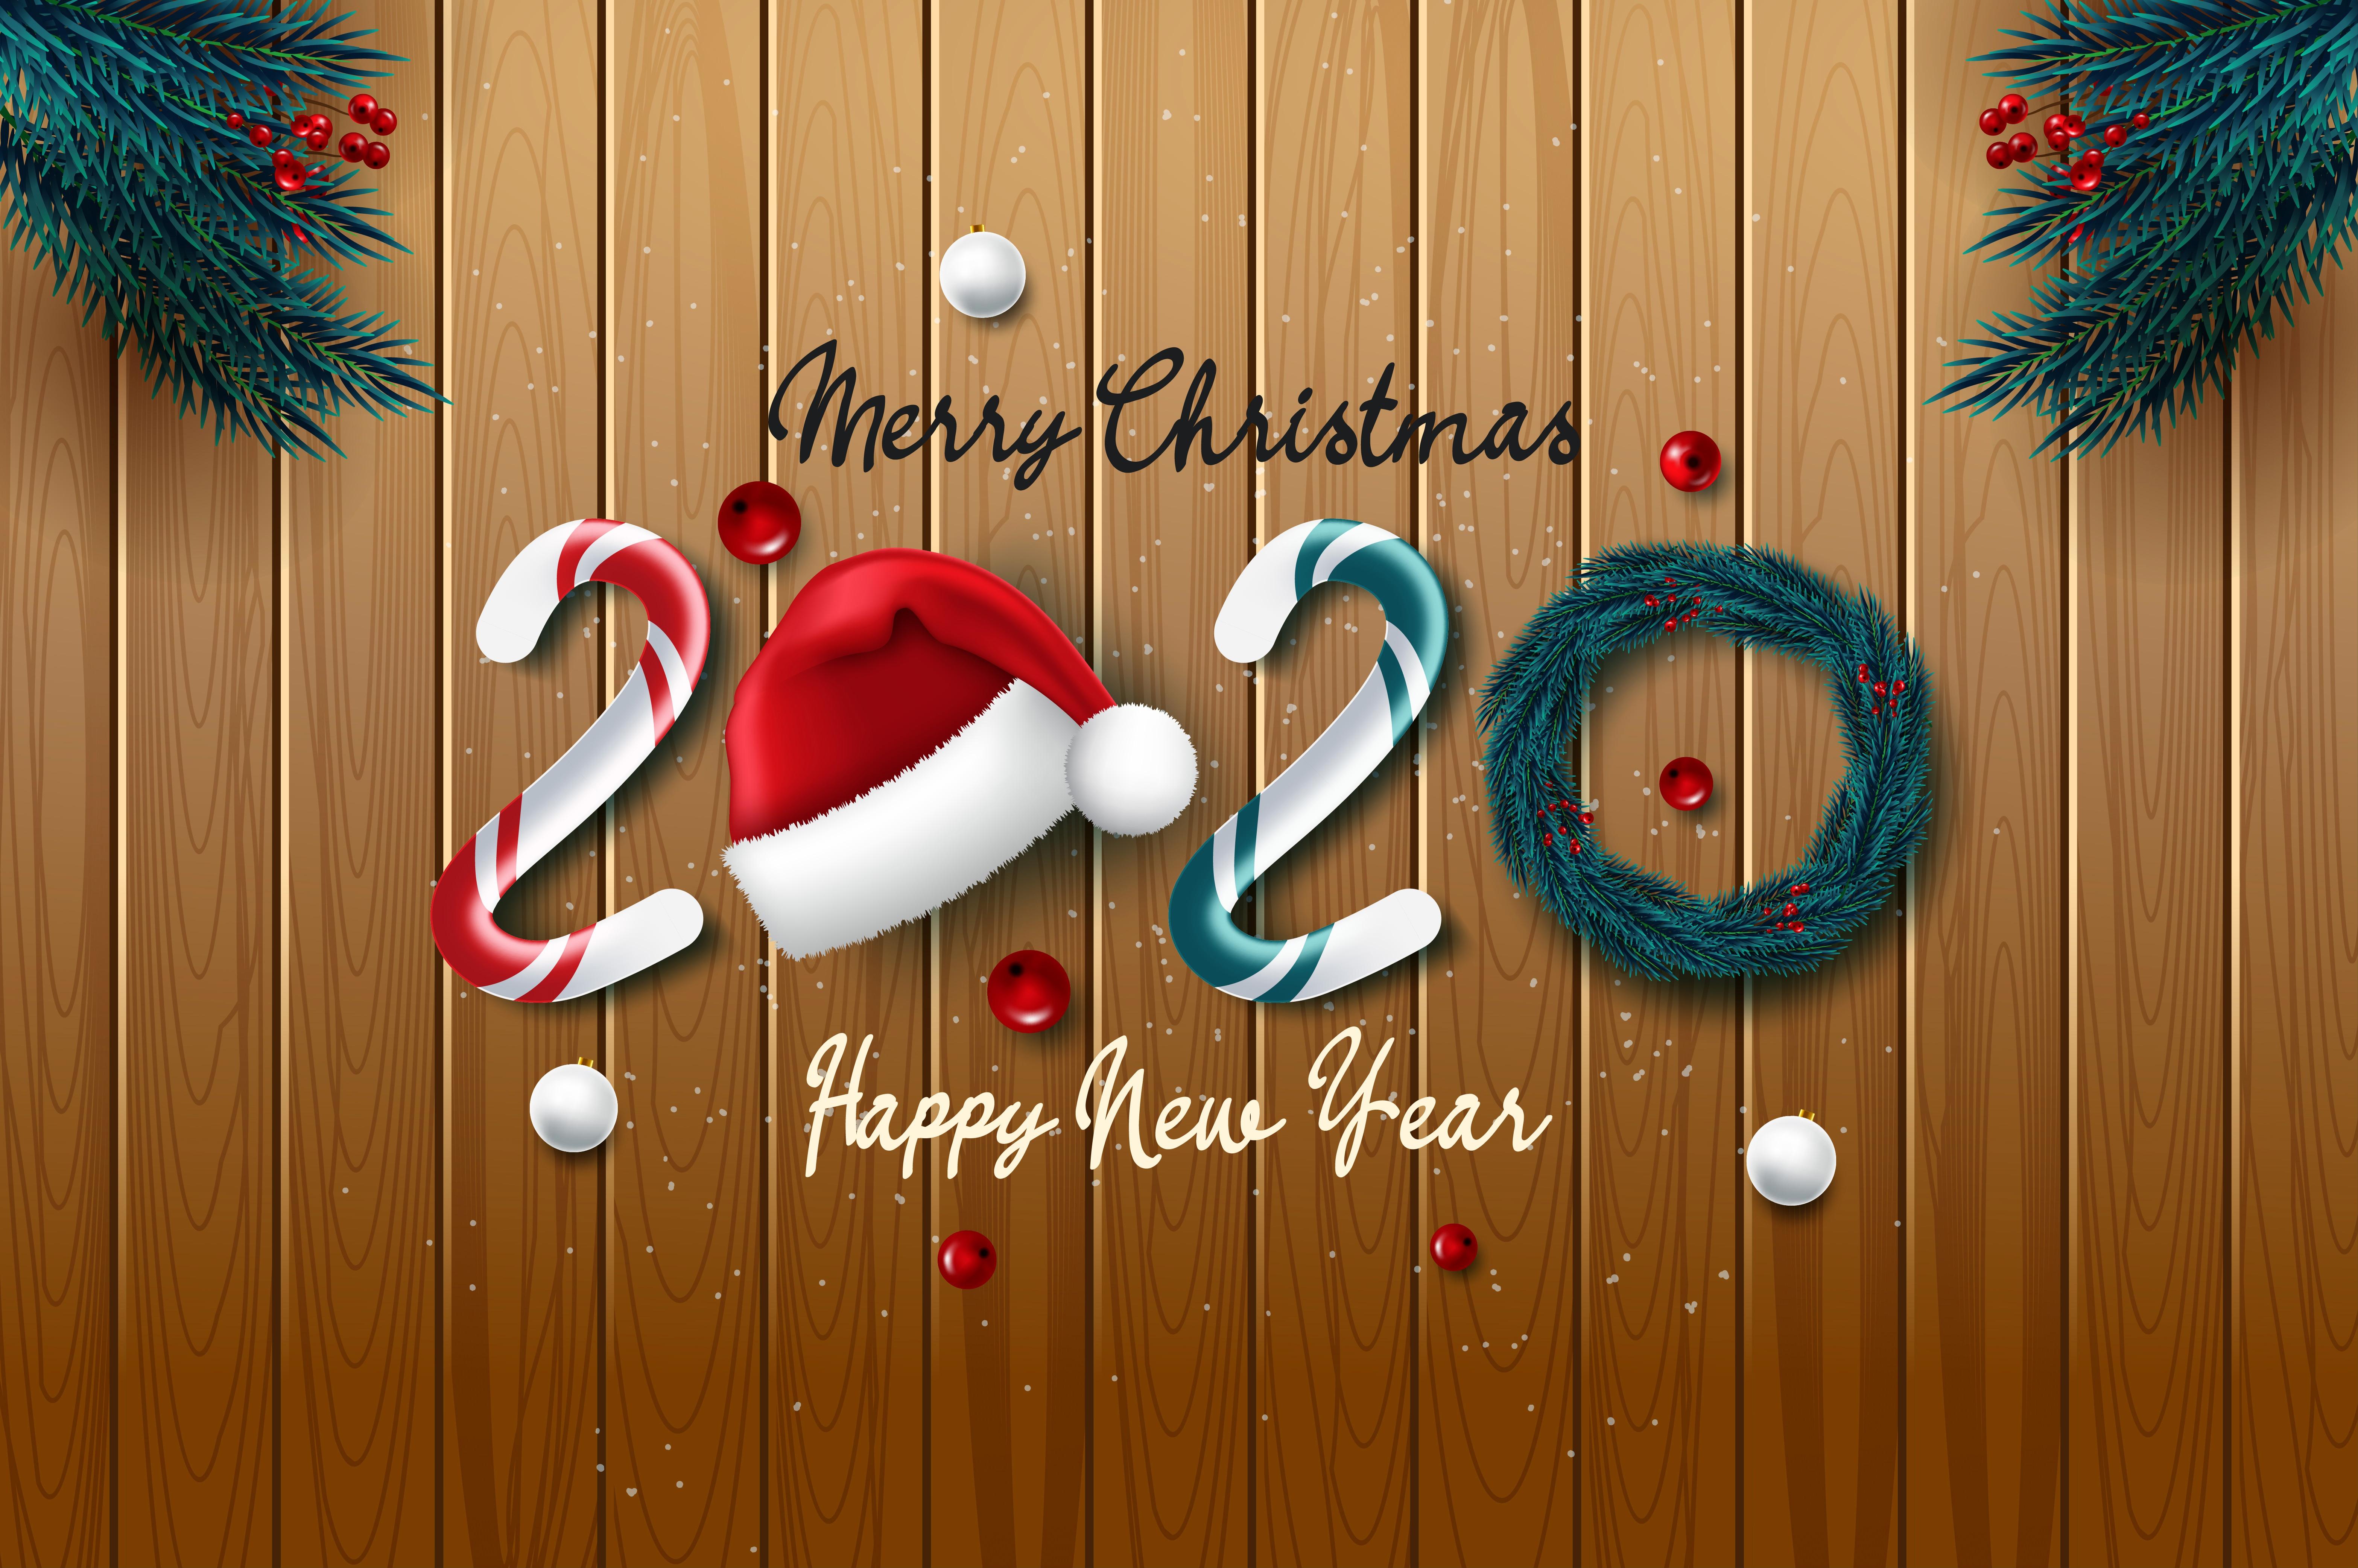 Merry Christmas 2020 Hd Wallpapers - Wallpaper Cave